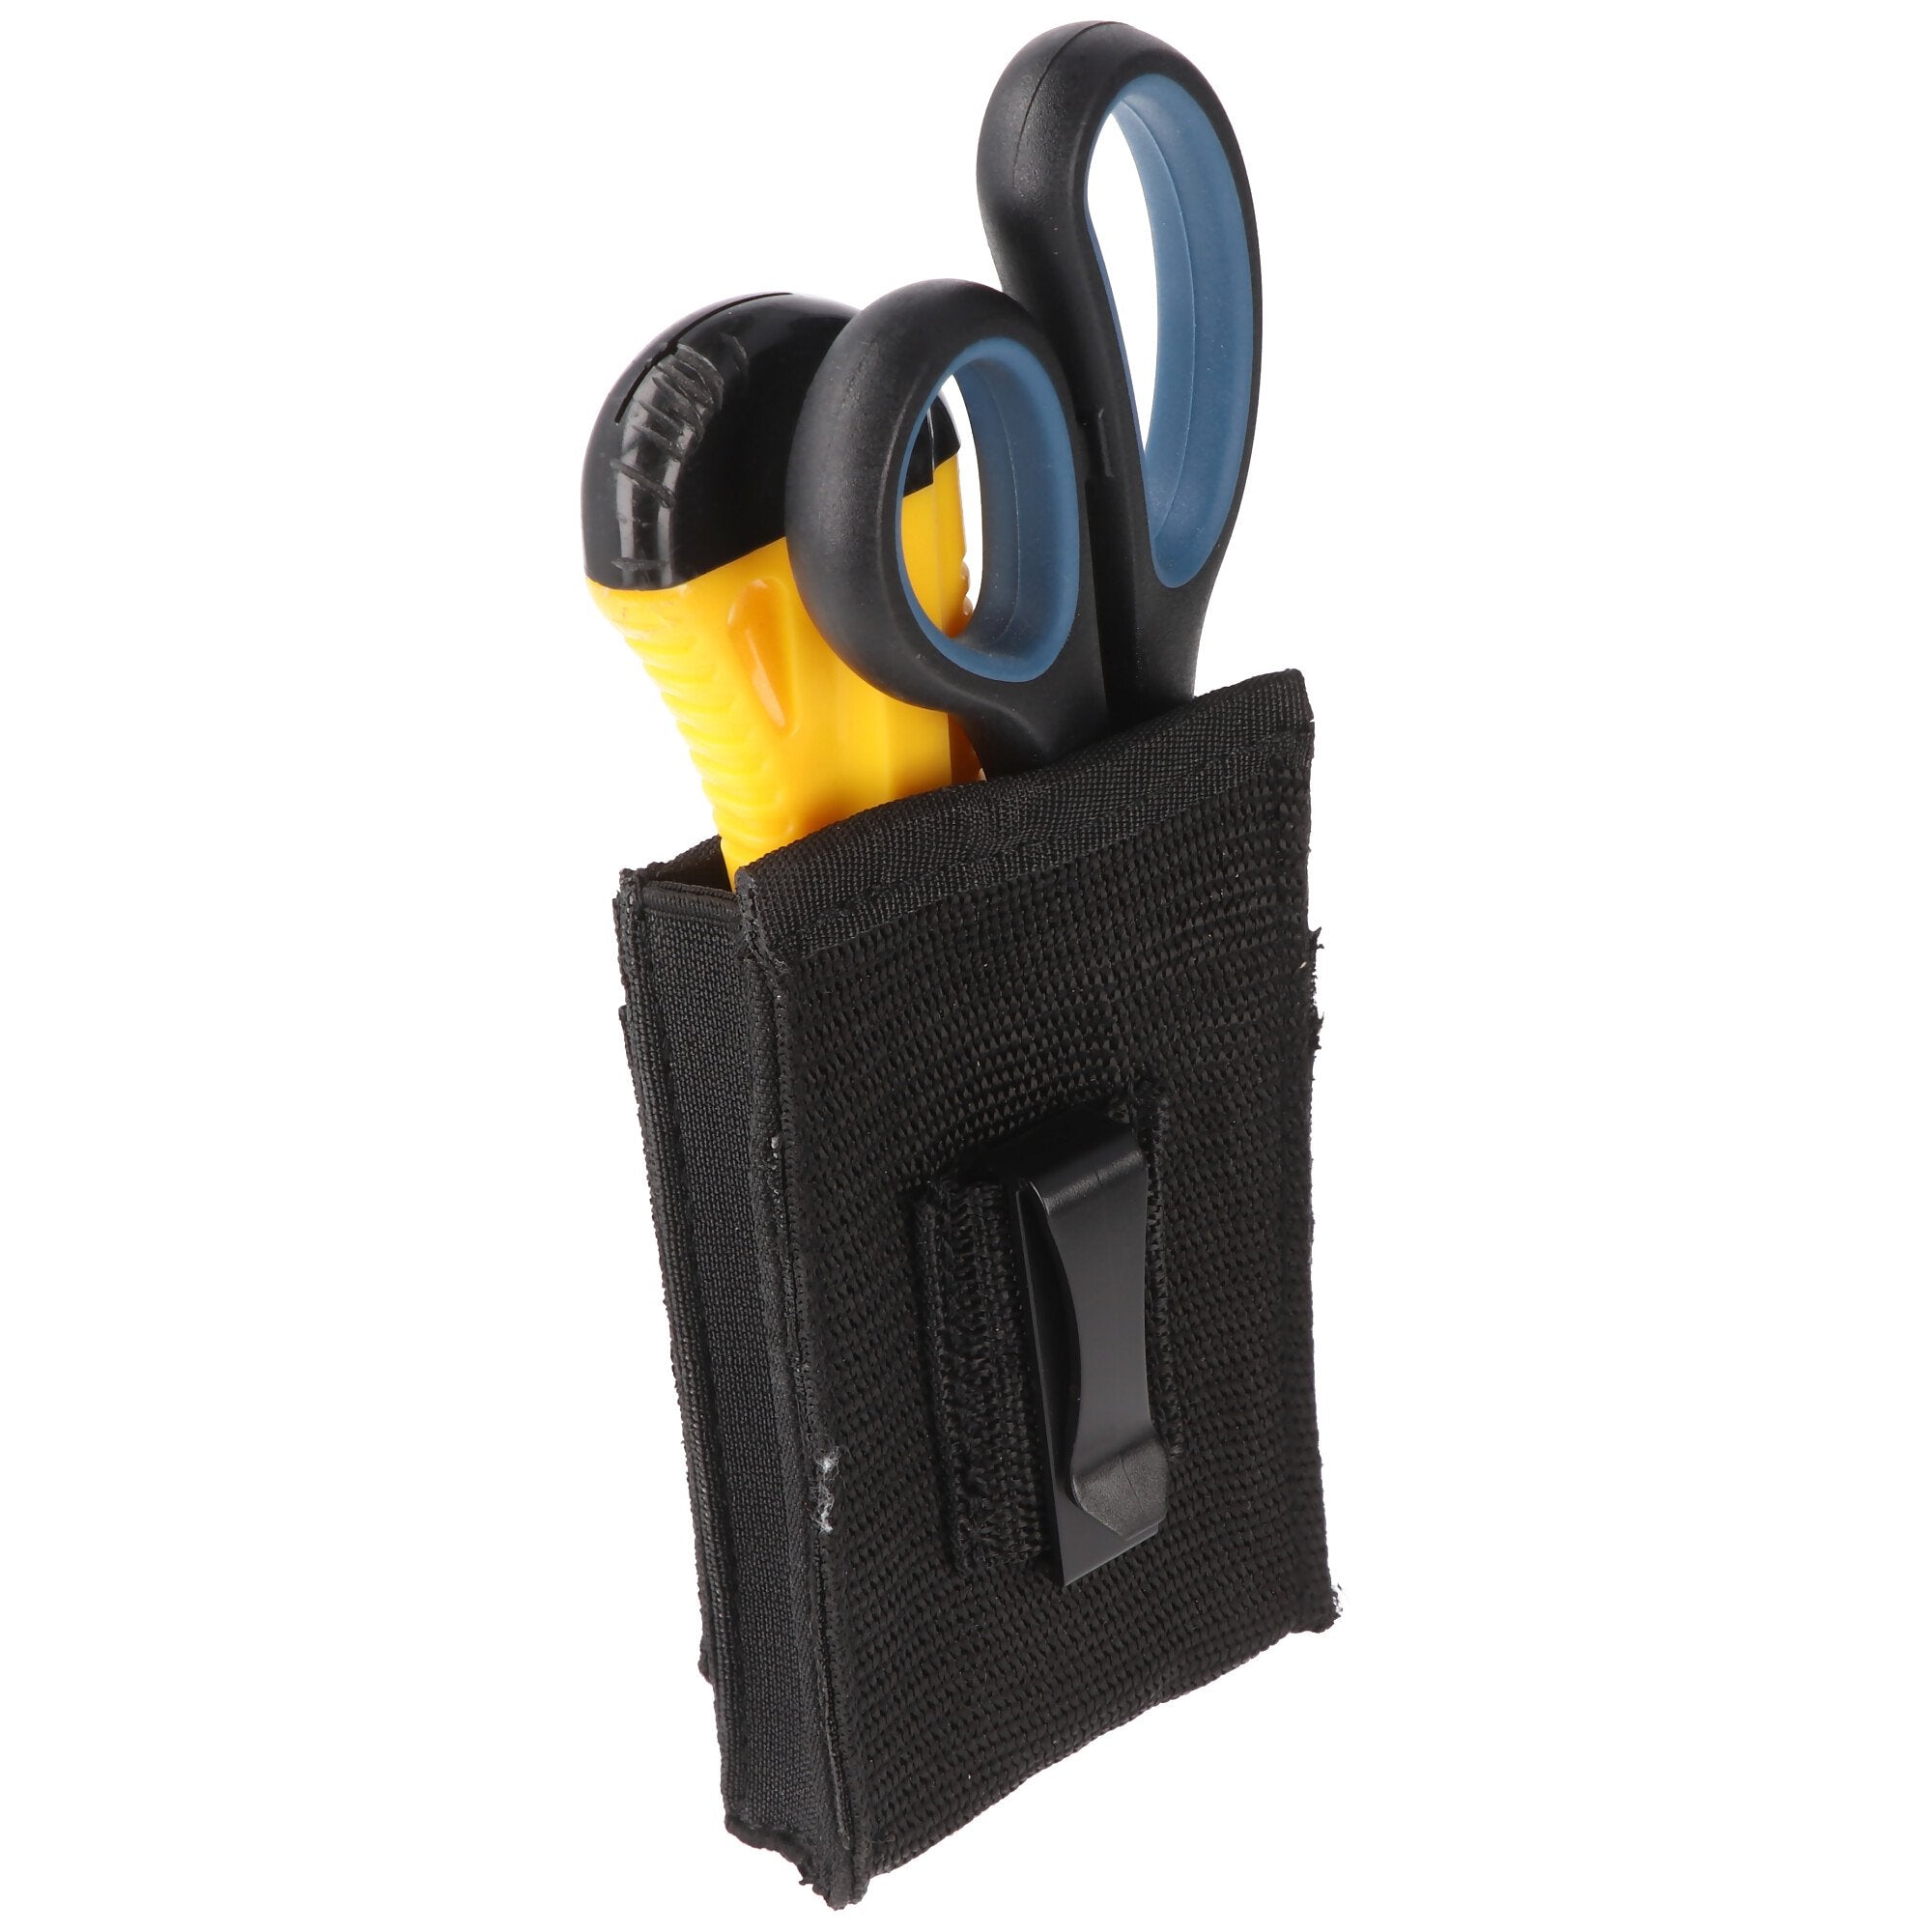 Universal belt pouch for cutters, durable polyester fabric, with clip for easy attachment to belt or